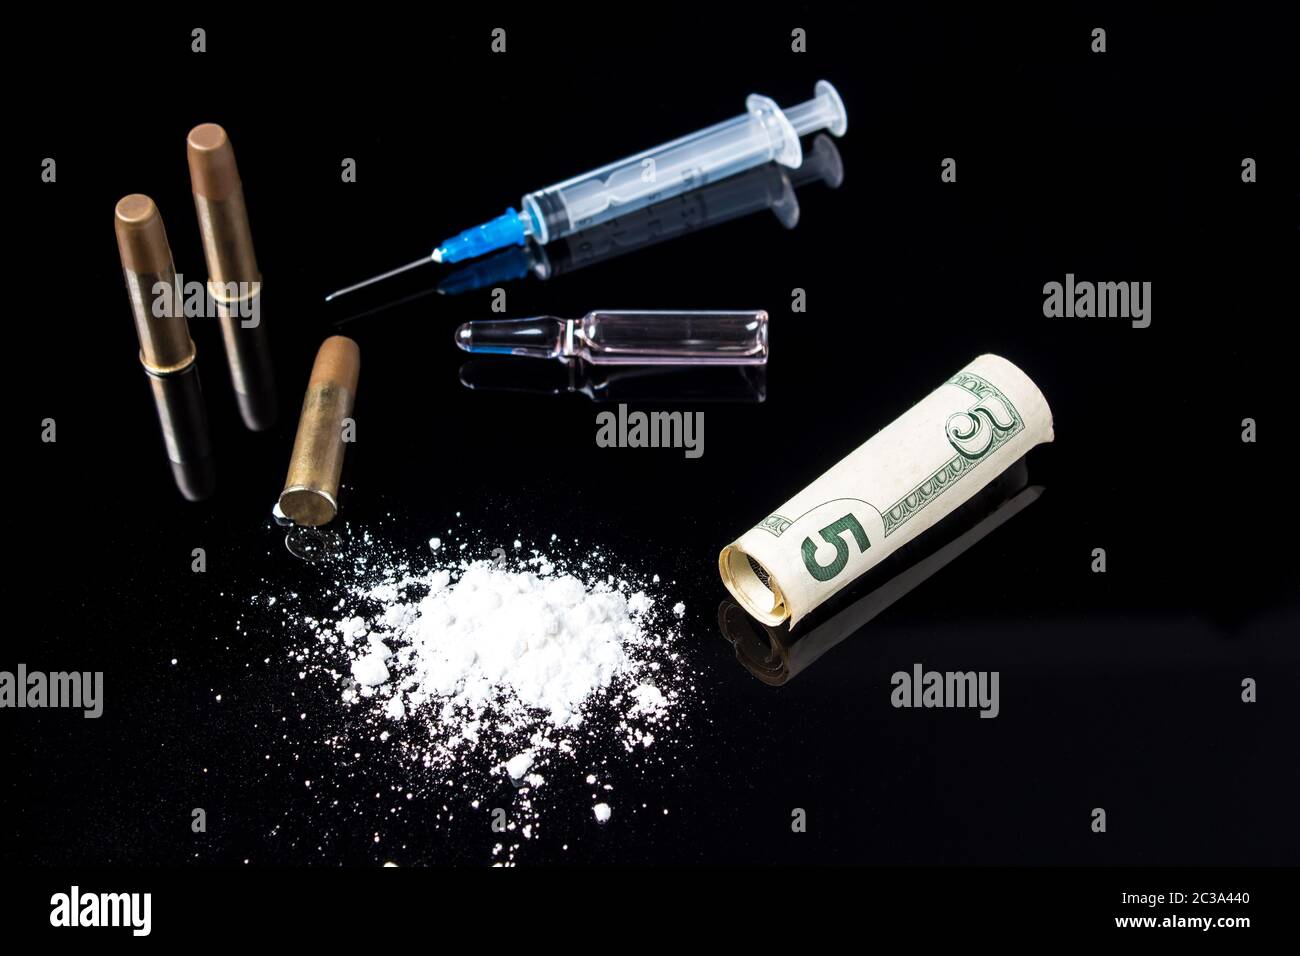 https://c8.alamy.com/comp/2C3A440/a-syringe-with-ampoules-white-powder-a-five-dollar-bill-with-bullets-lying-on-a-black-glass-background-dangerous-bad-habits-addiction-to-drugs-an-2C3A440.jpg